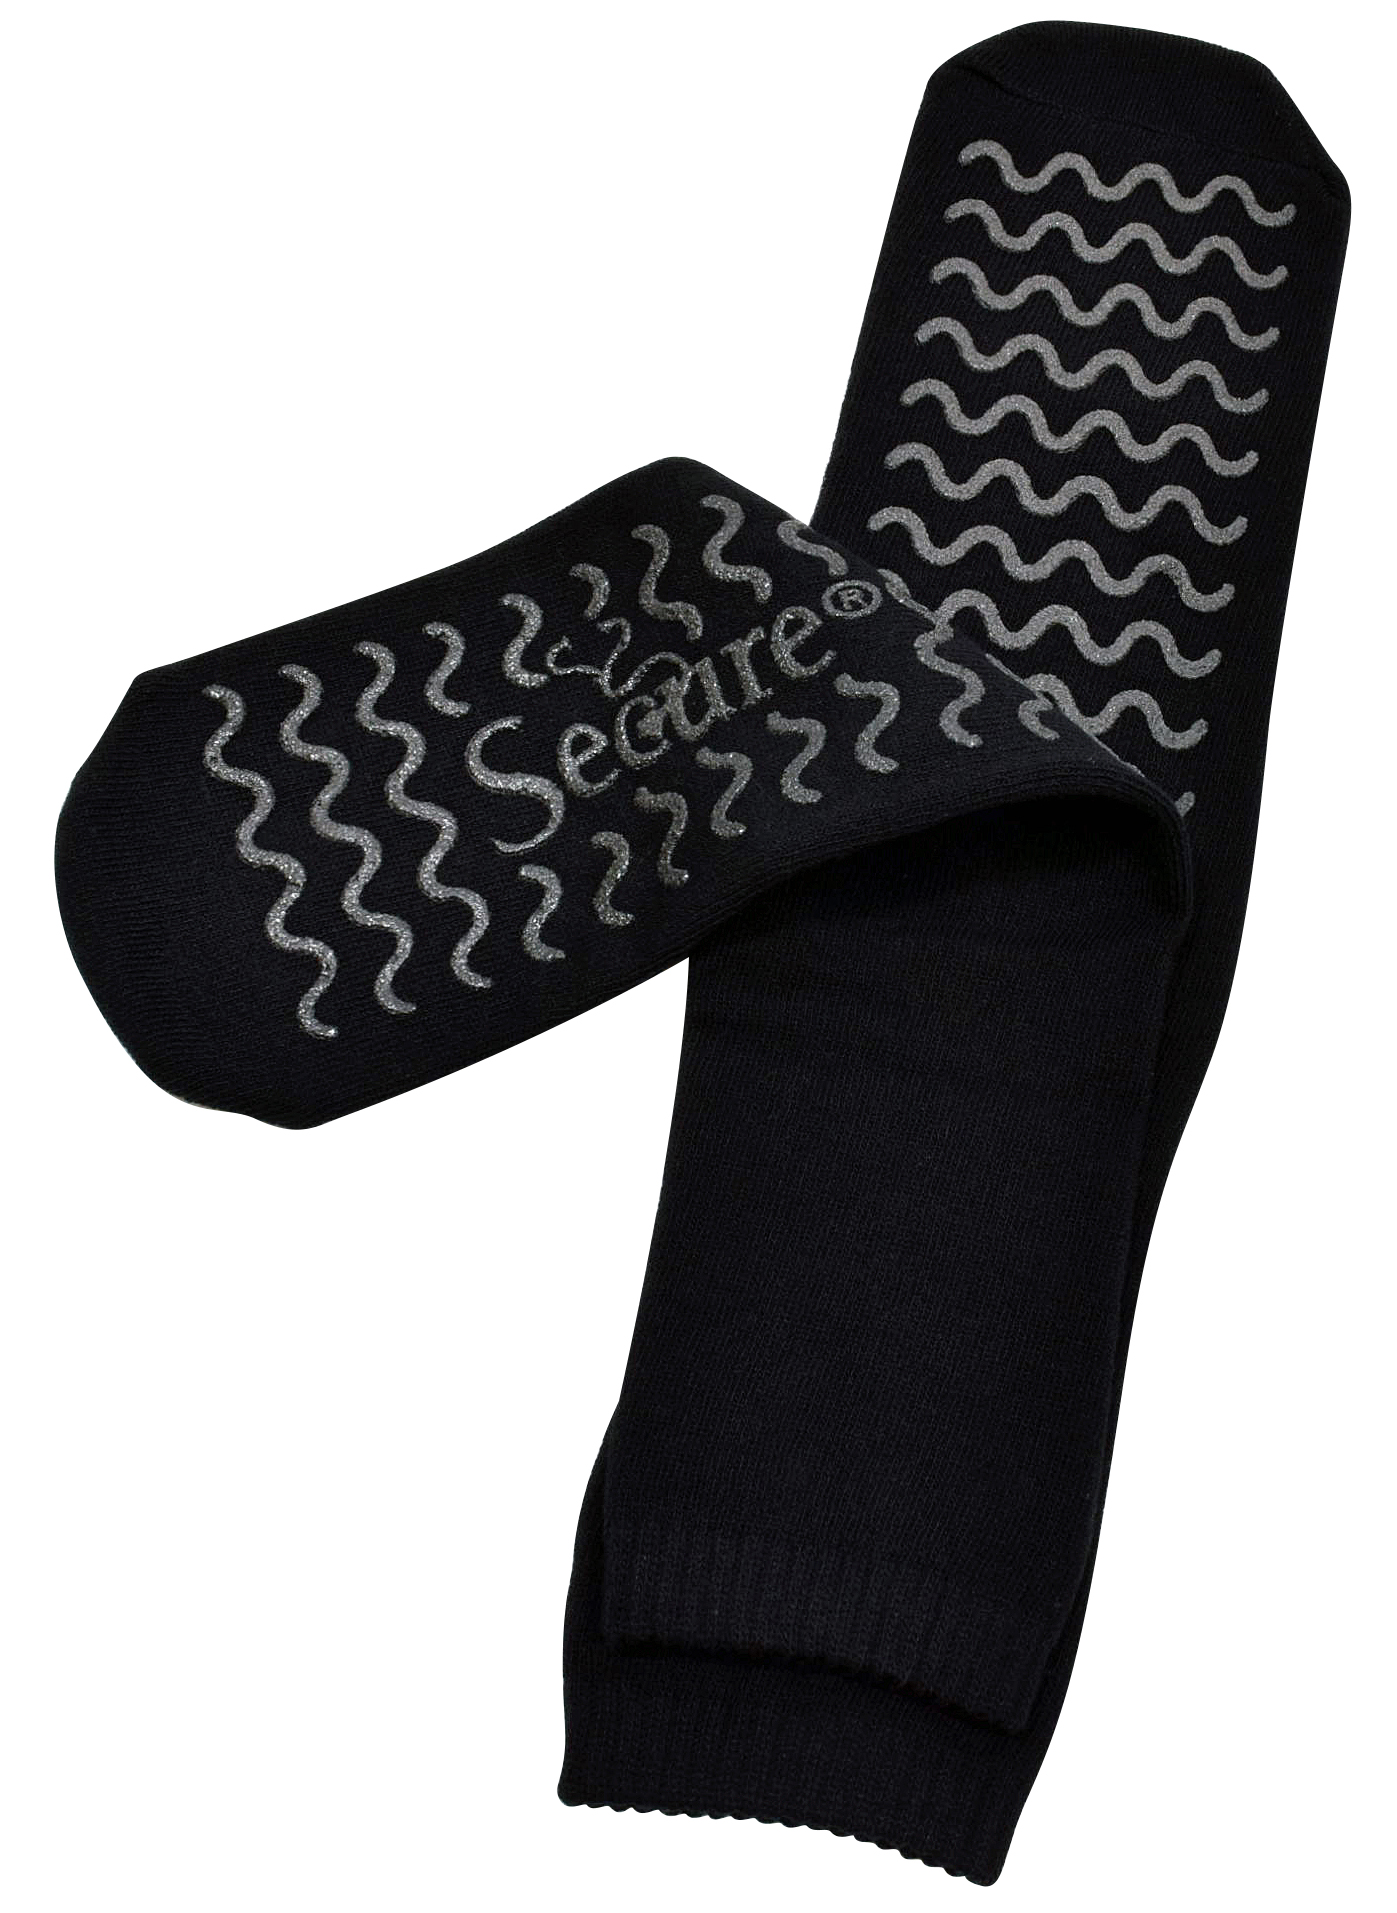 Secure® Ultra Soft Non-Slip Grip Socks with All-Around Tread